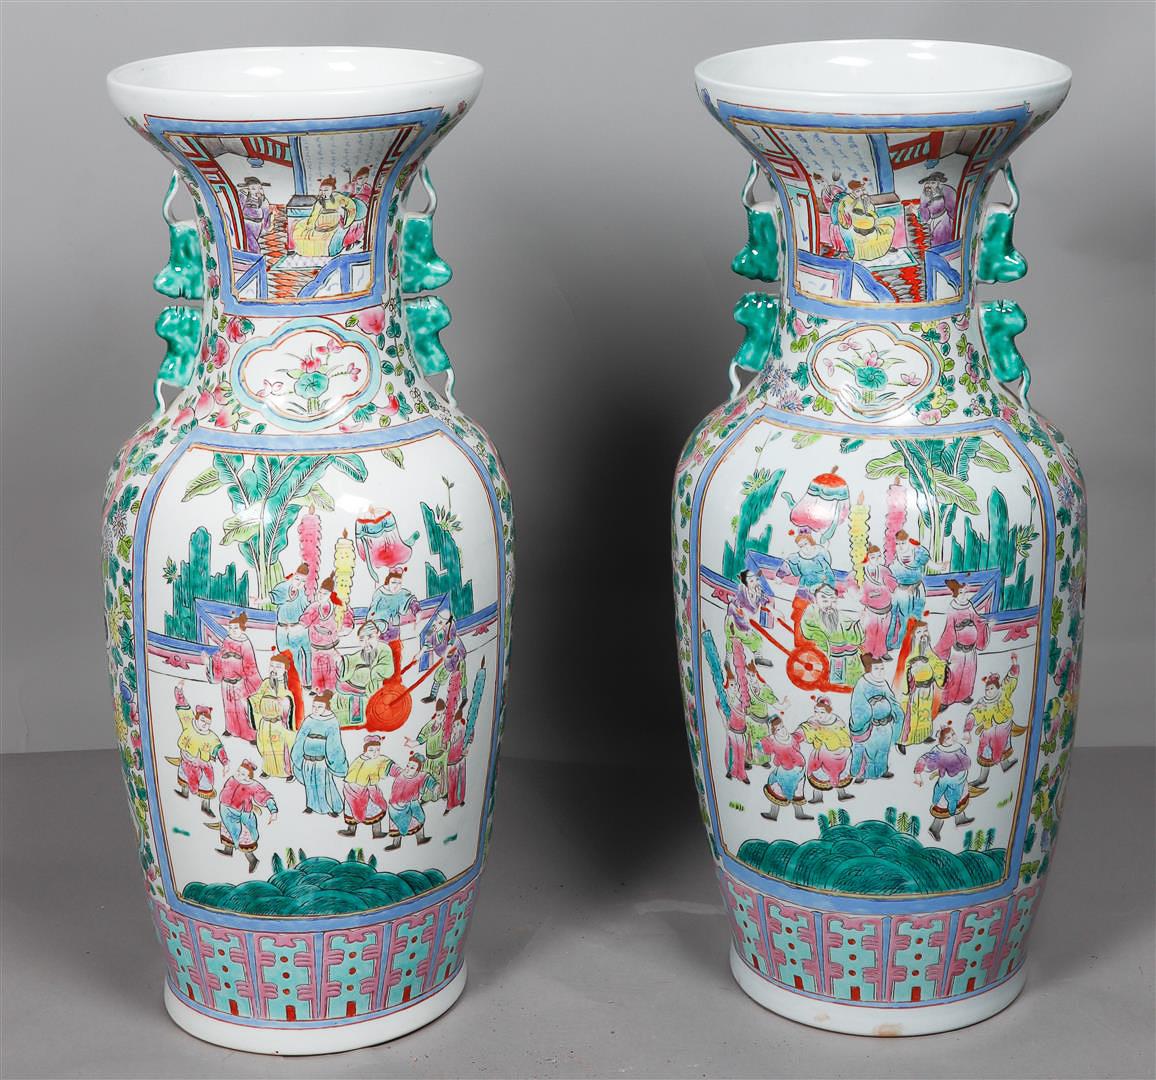 A pair of large Famille Rose vases decorated with various figures. Late 20th century.